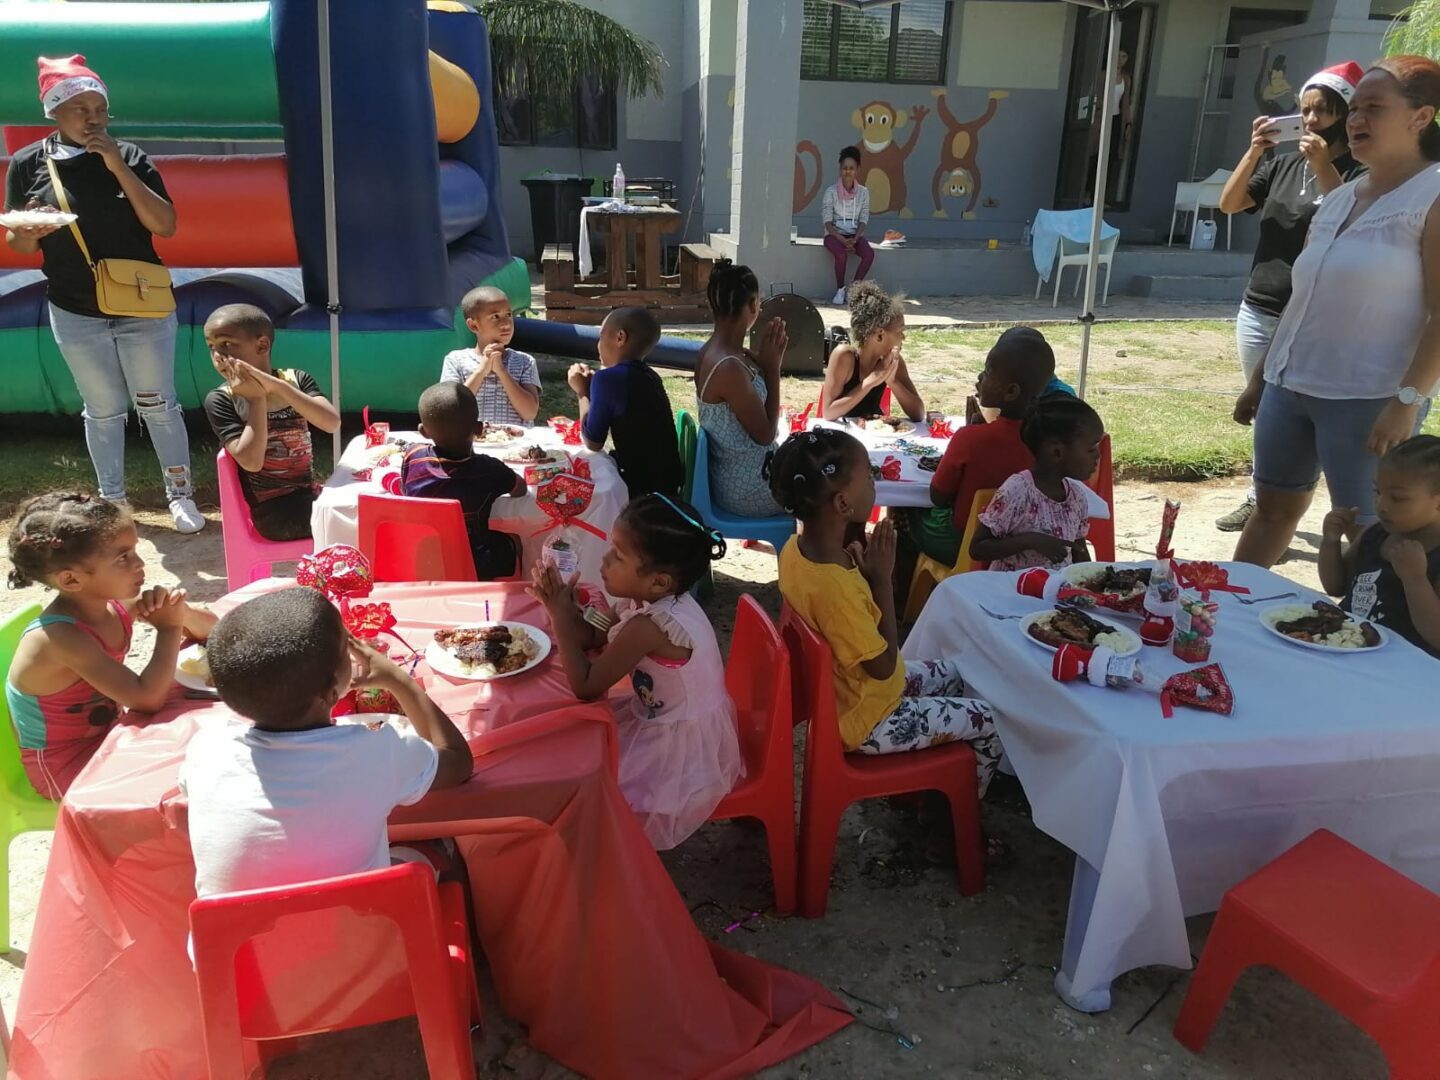 A group of children sitting at tables with food.